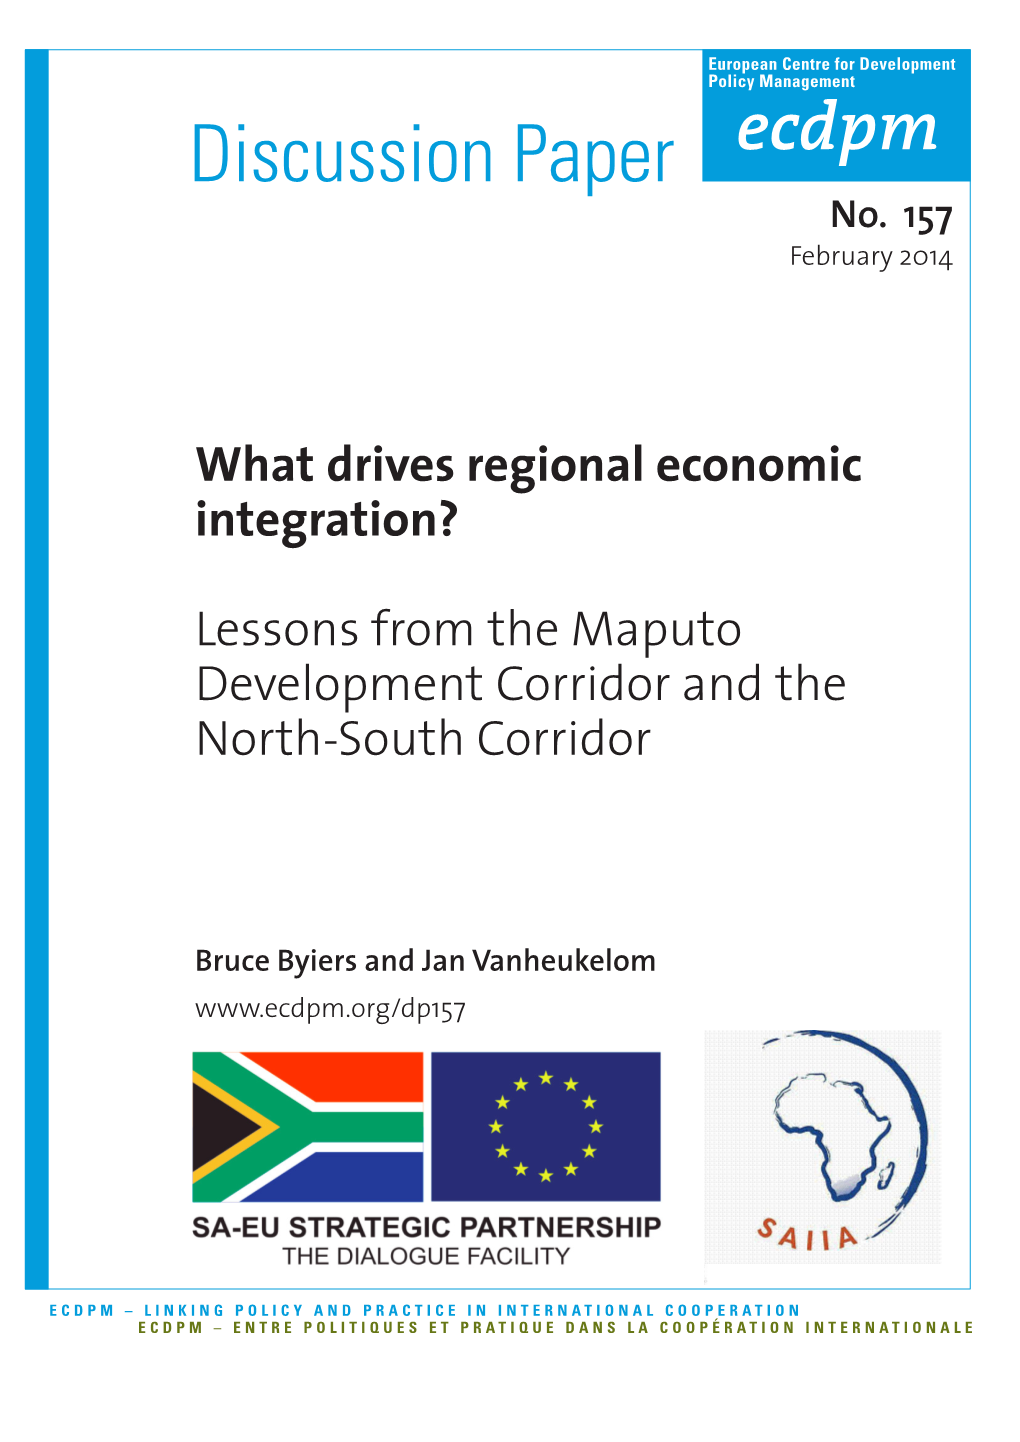 What Drives Regional Economic Integration? Lessons from the Maputo Development Corridor and the North-South Corridor